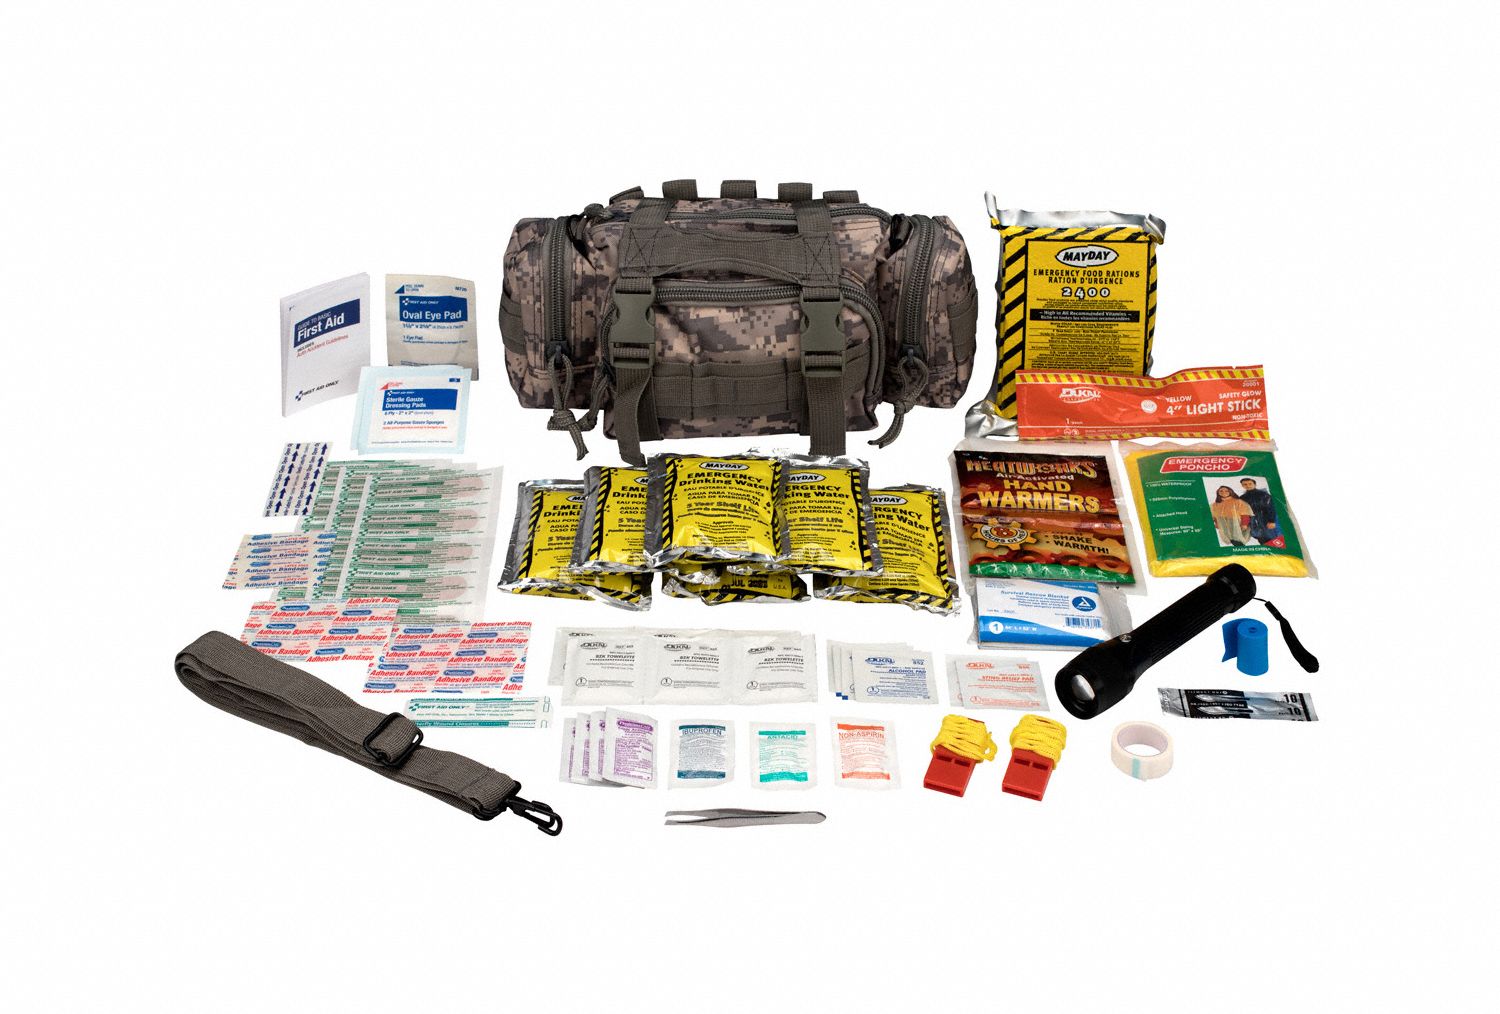 Survival Kit: 73 Components, 1, Digital Camouflage, 6 in Ht, 12 in Wd, 5 in Lg